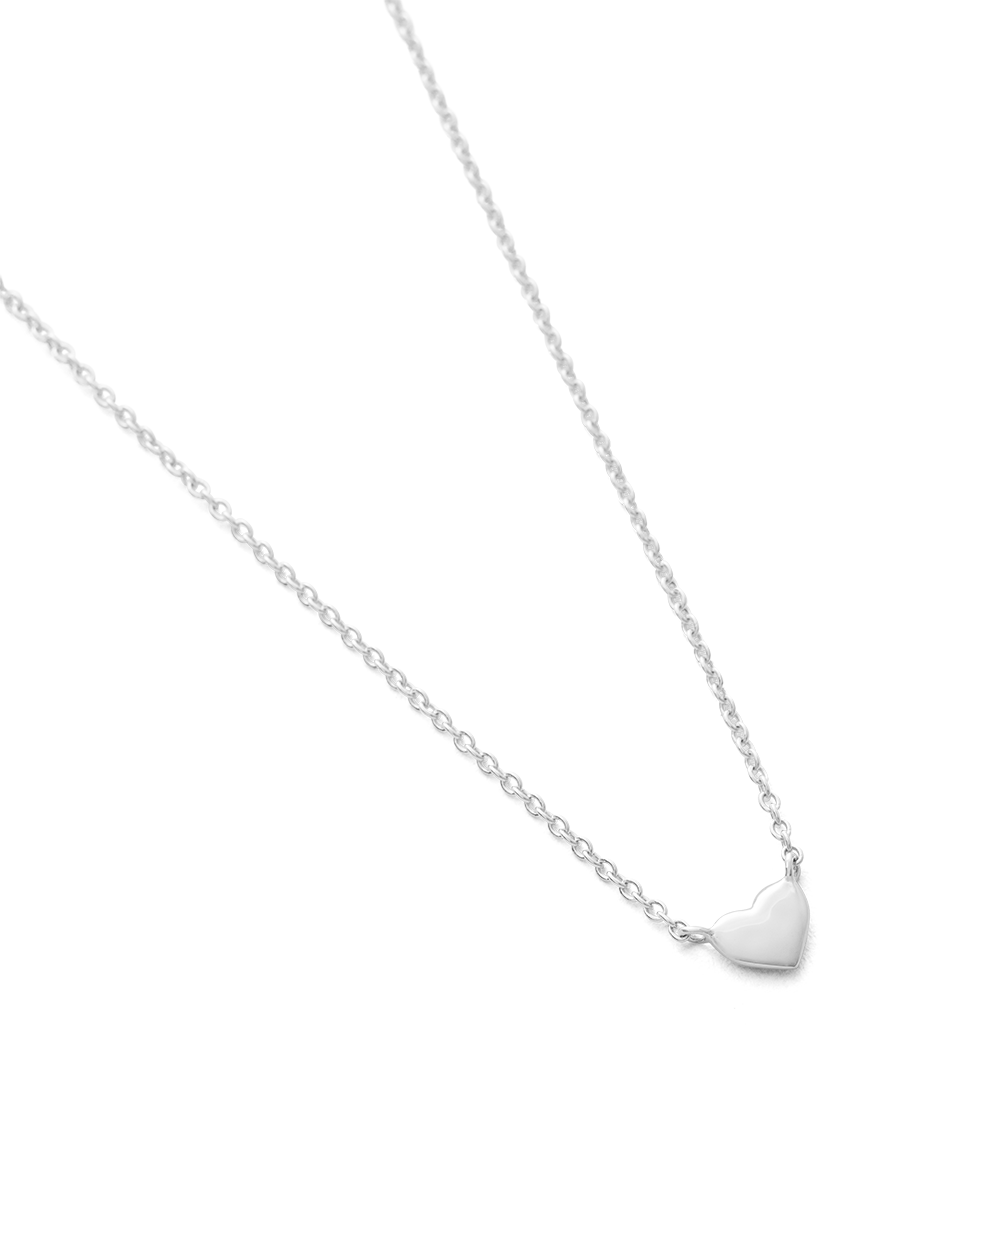 L'AMOUR HEART NECKLACE (STERLING SILVER)